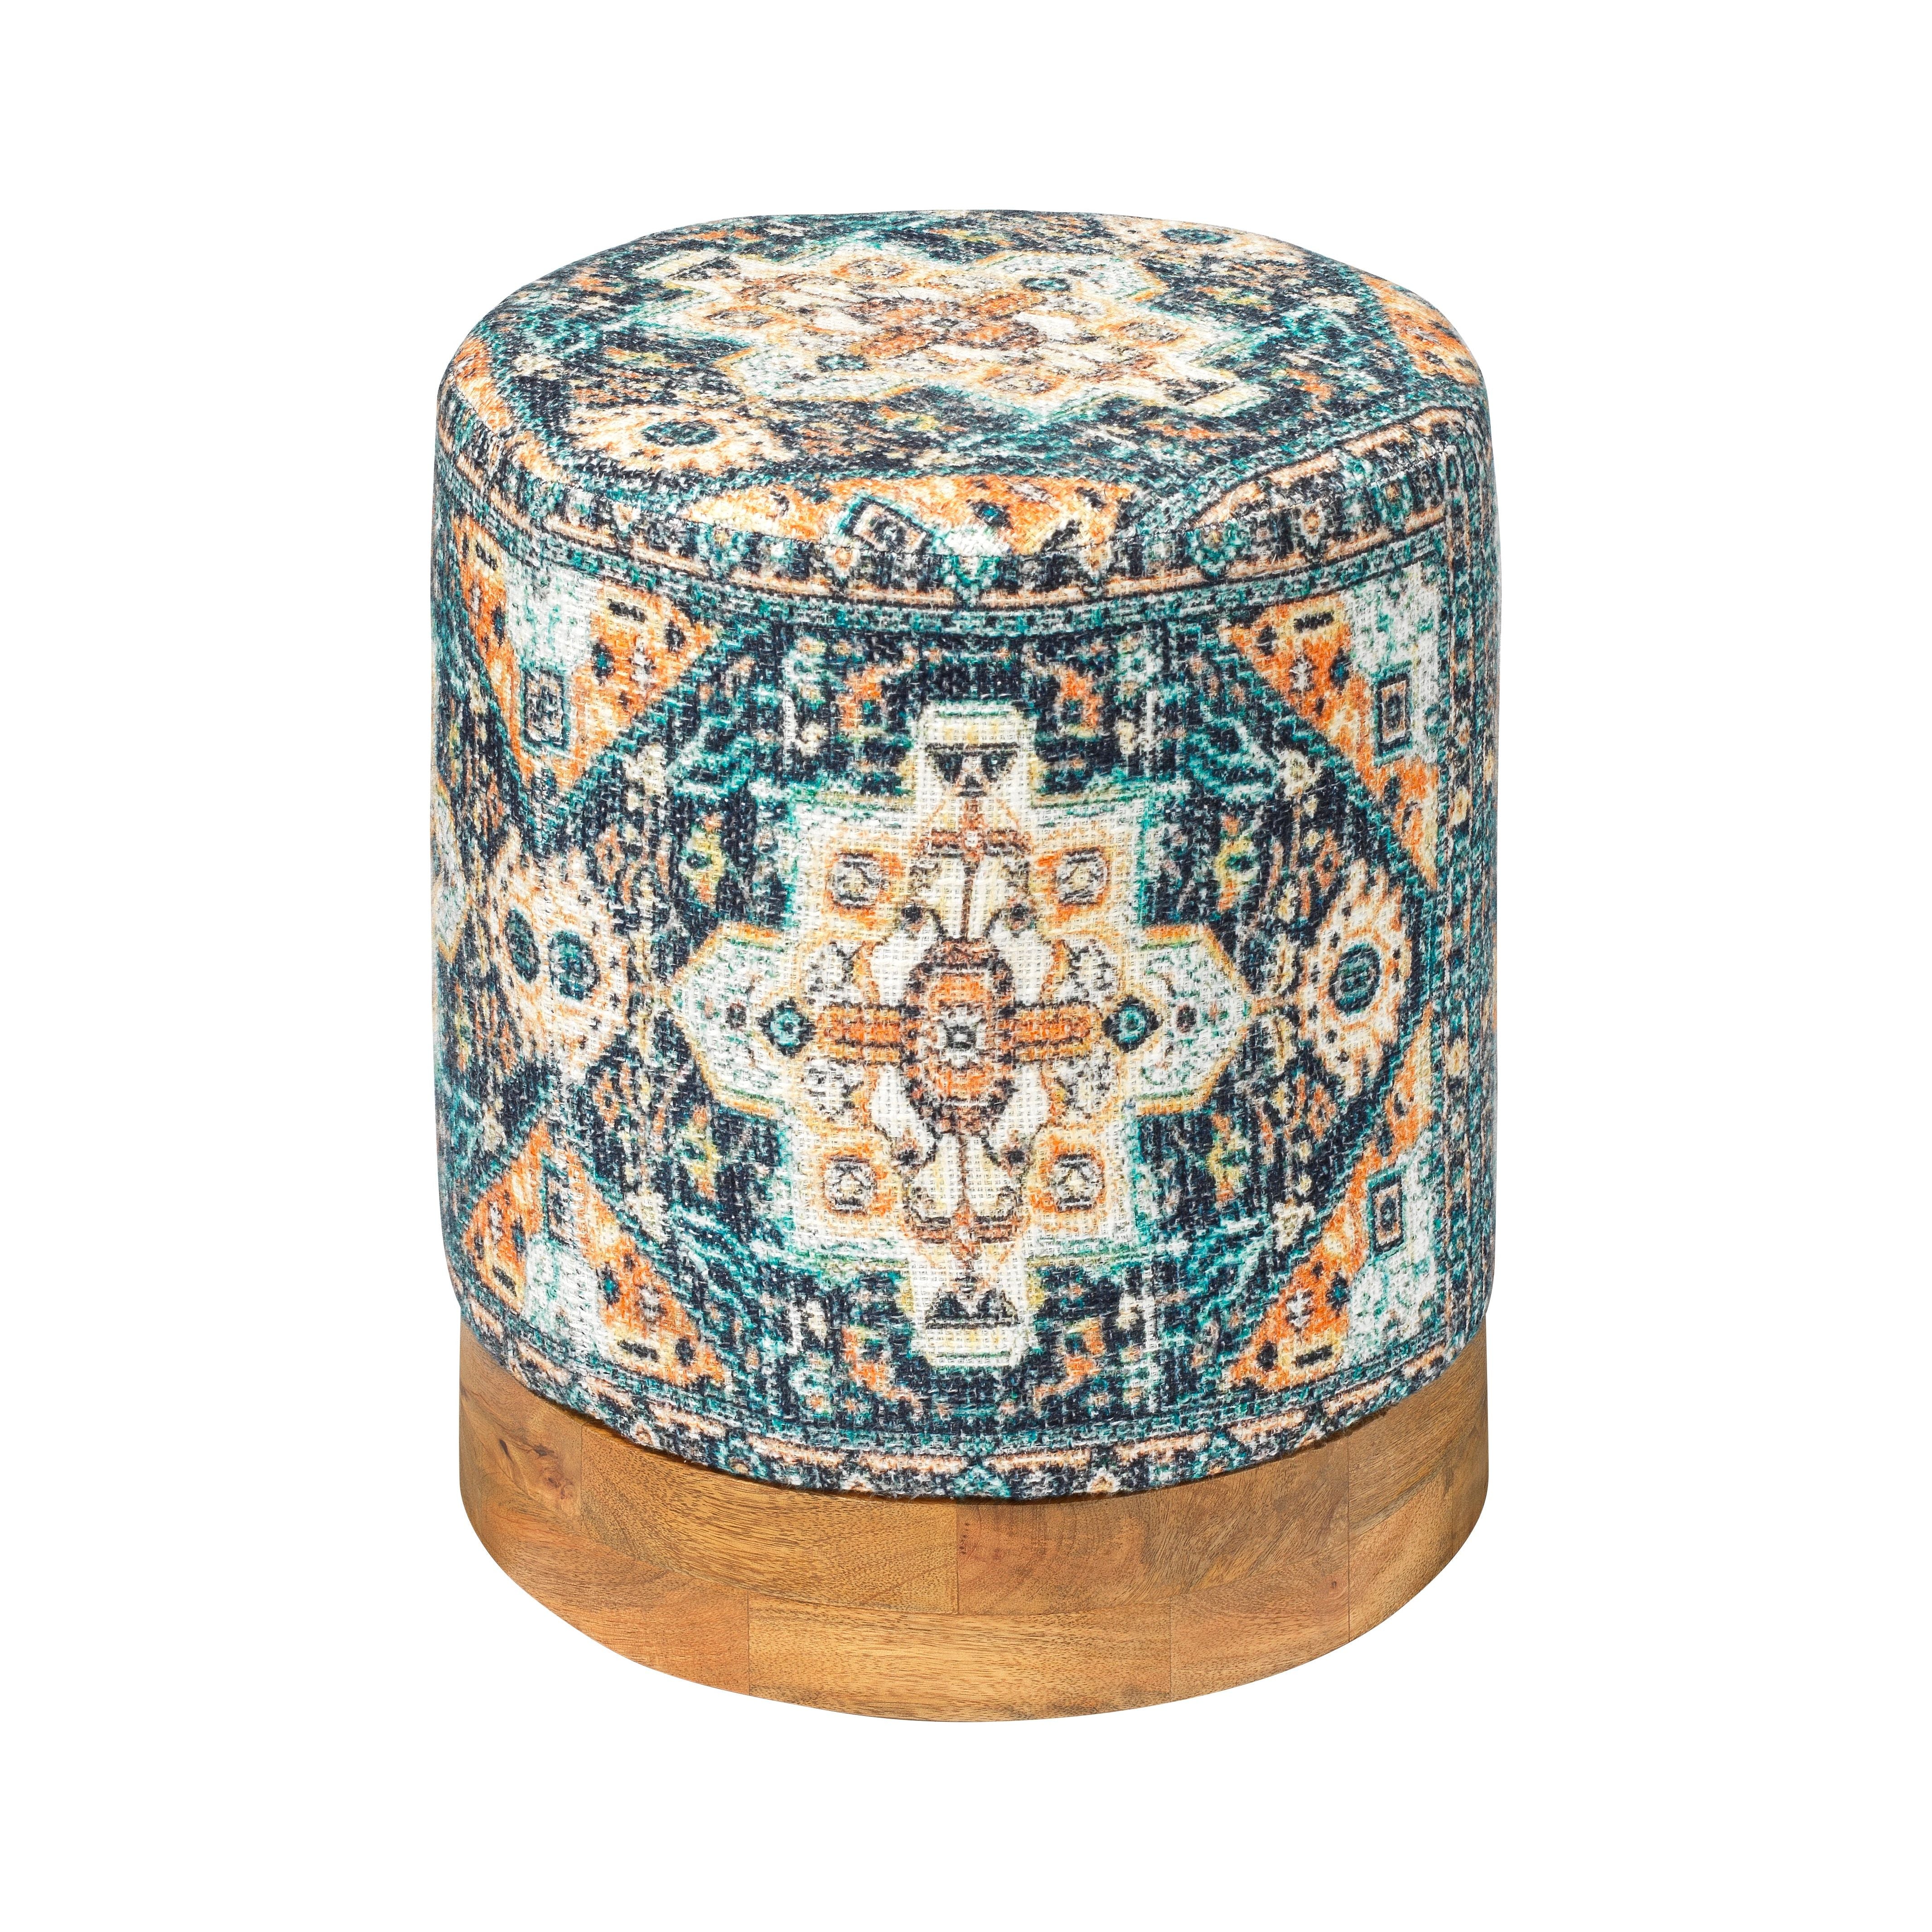 Jamie Young Company - LS20MENDNVCL - Mendocino Upholstered Ottoman -  - Blue